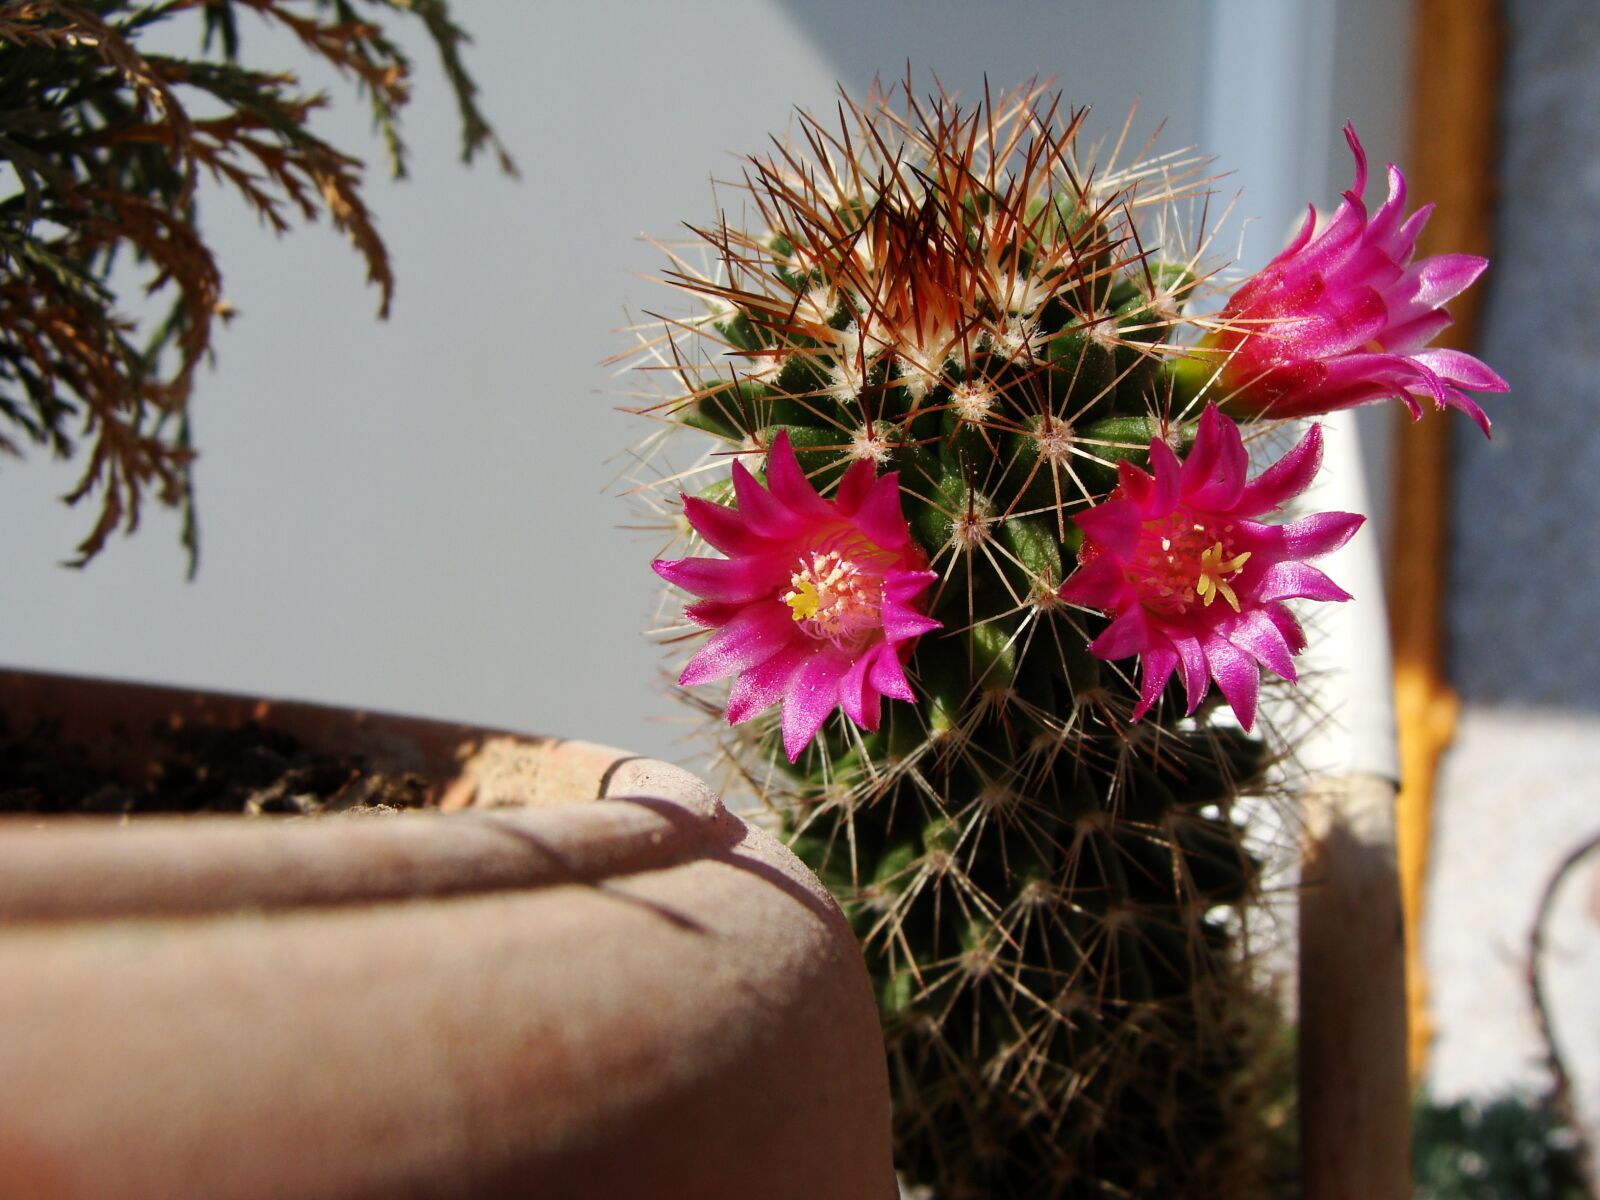 Sony Cyber-shot DSC-H10 sample photo. Cactus, bloom, cacti photography